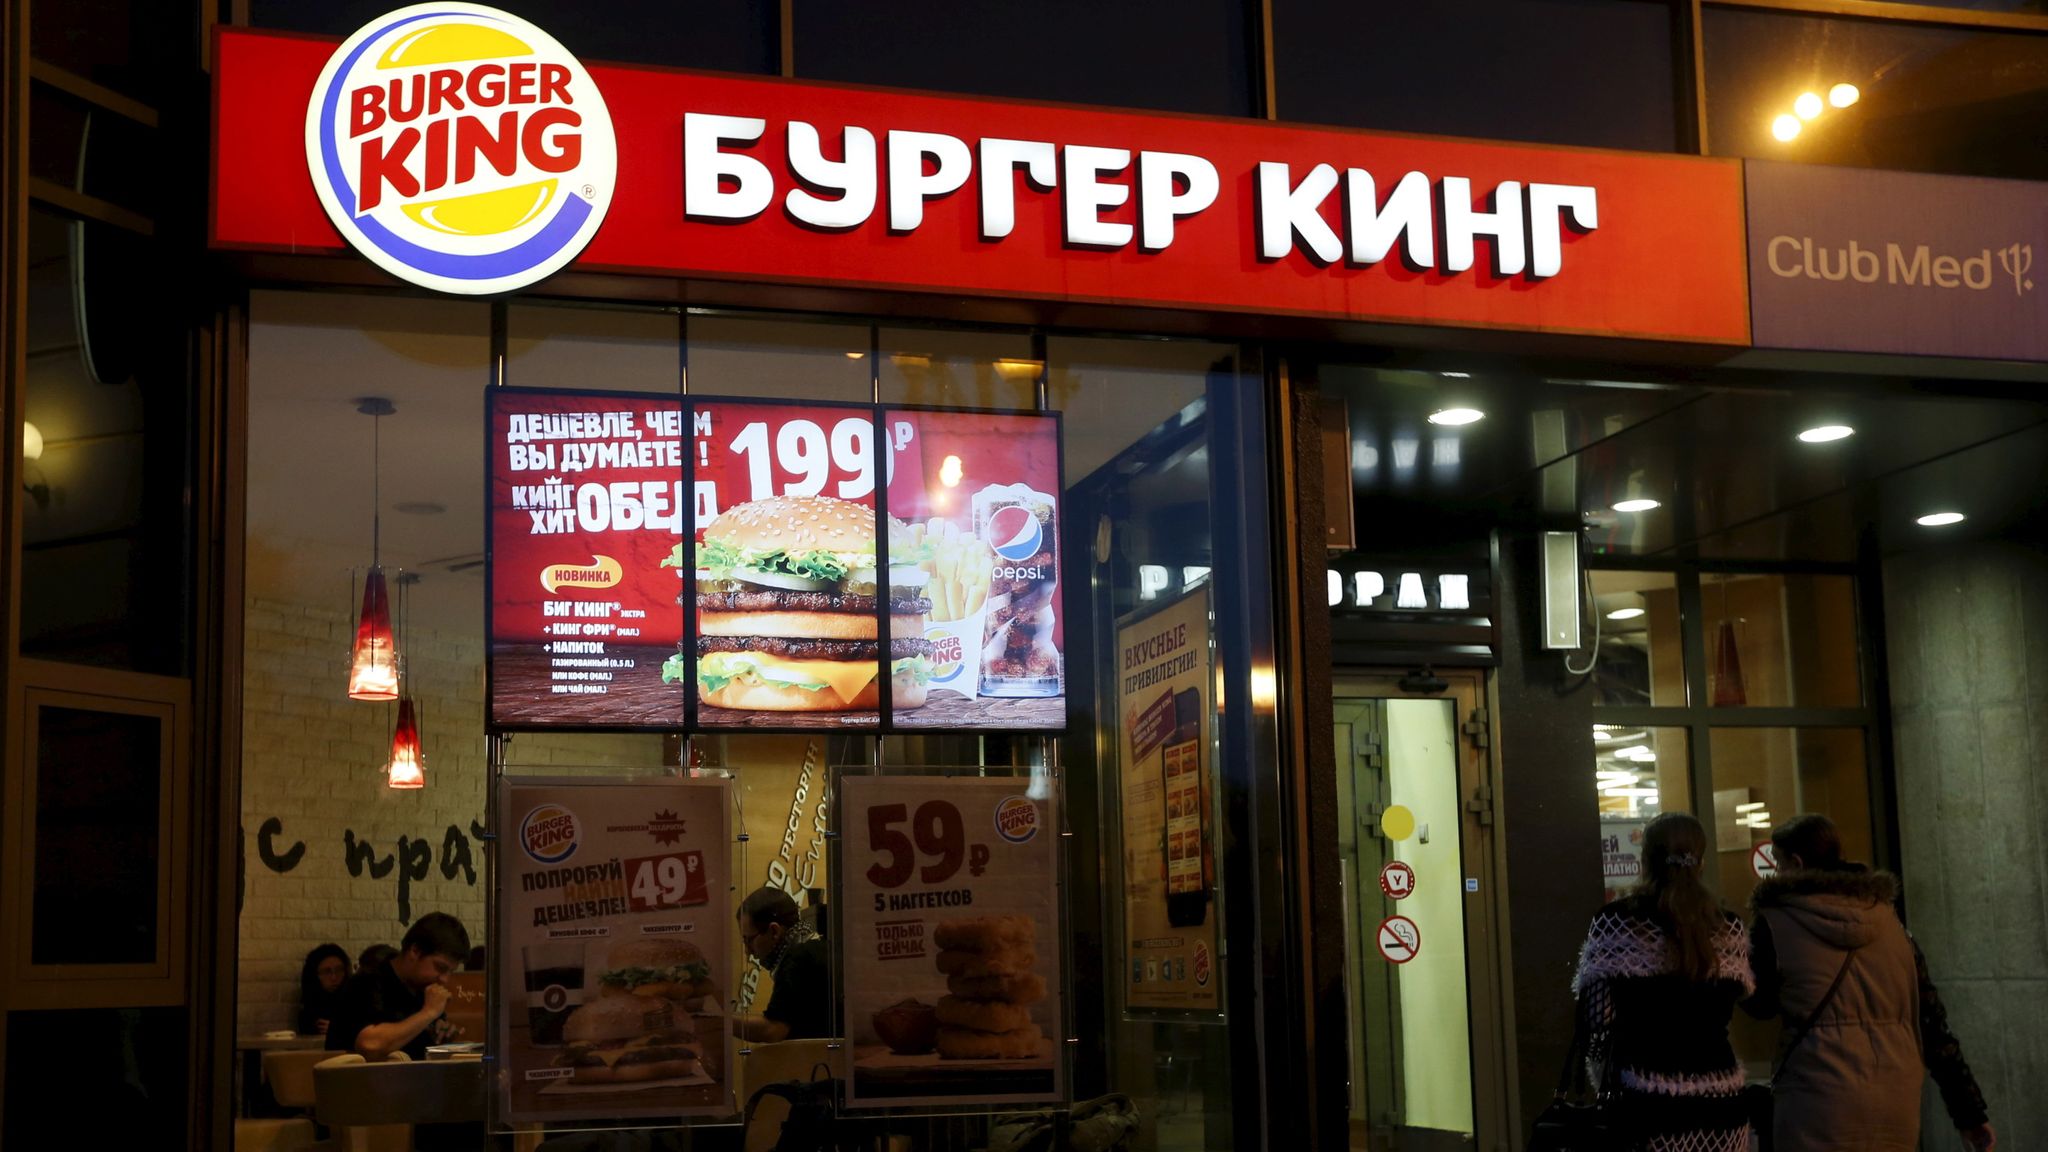 Burger King owner says Russia partner has refused to shut restaurants